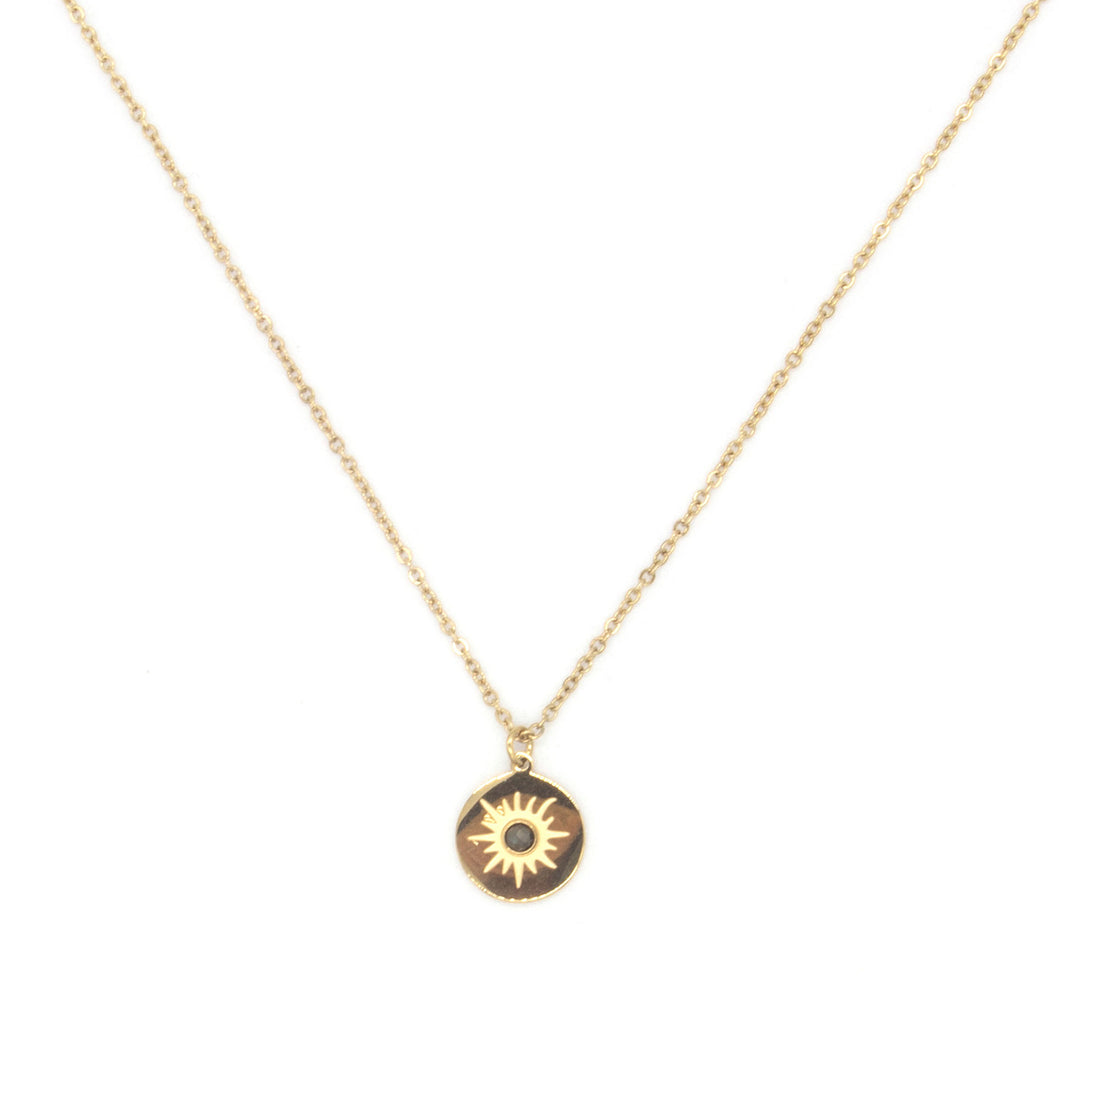 zag-bijoux-necklace-sns5459-brown-stone-circle-with-sun-gold-01